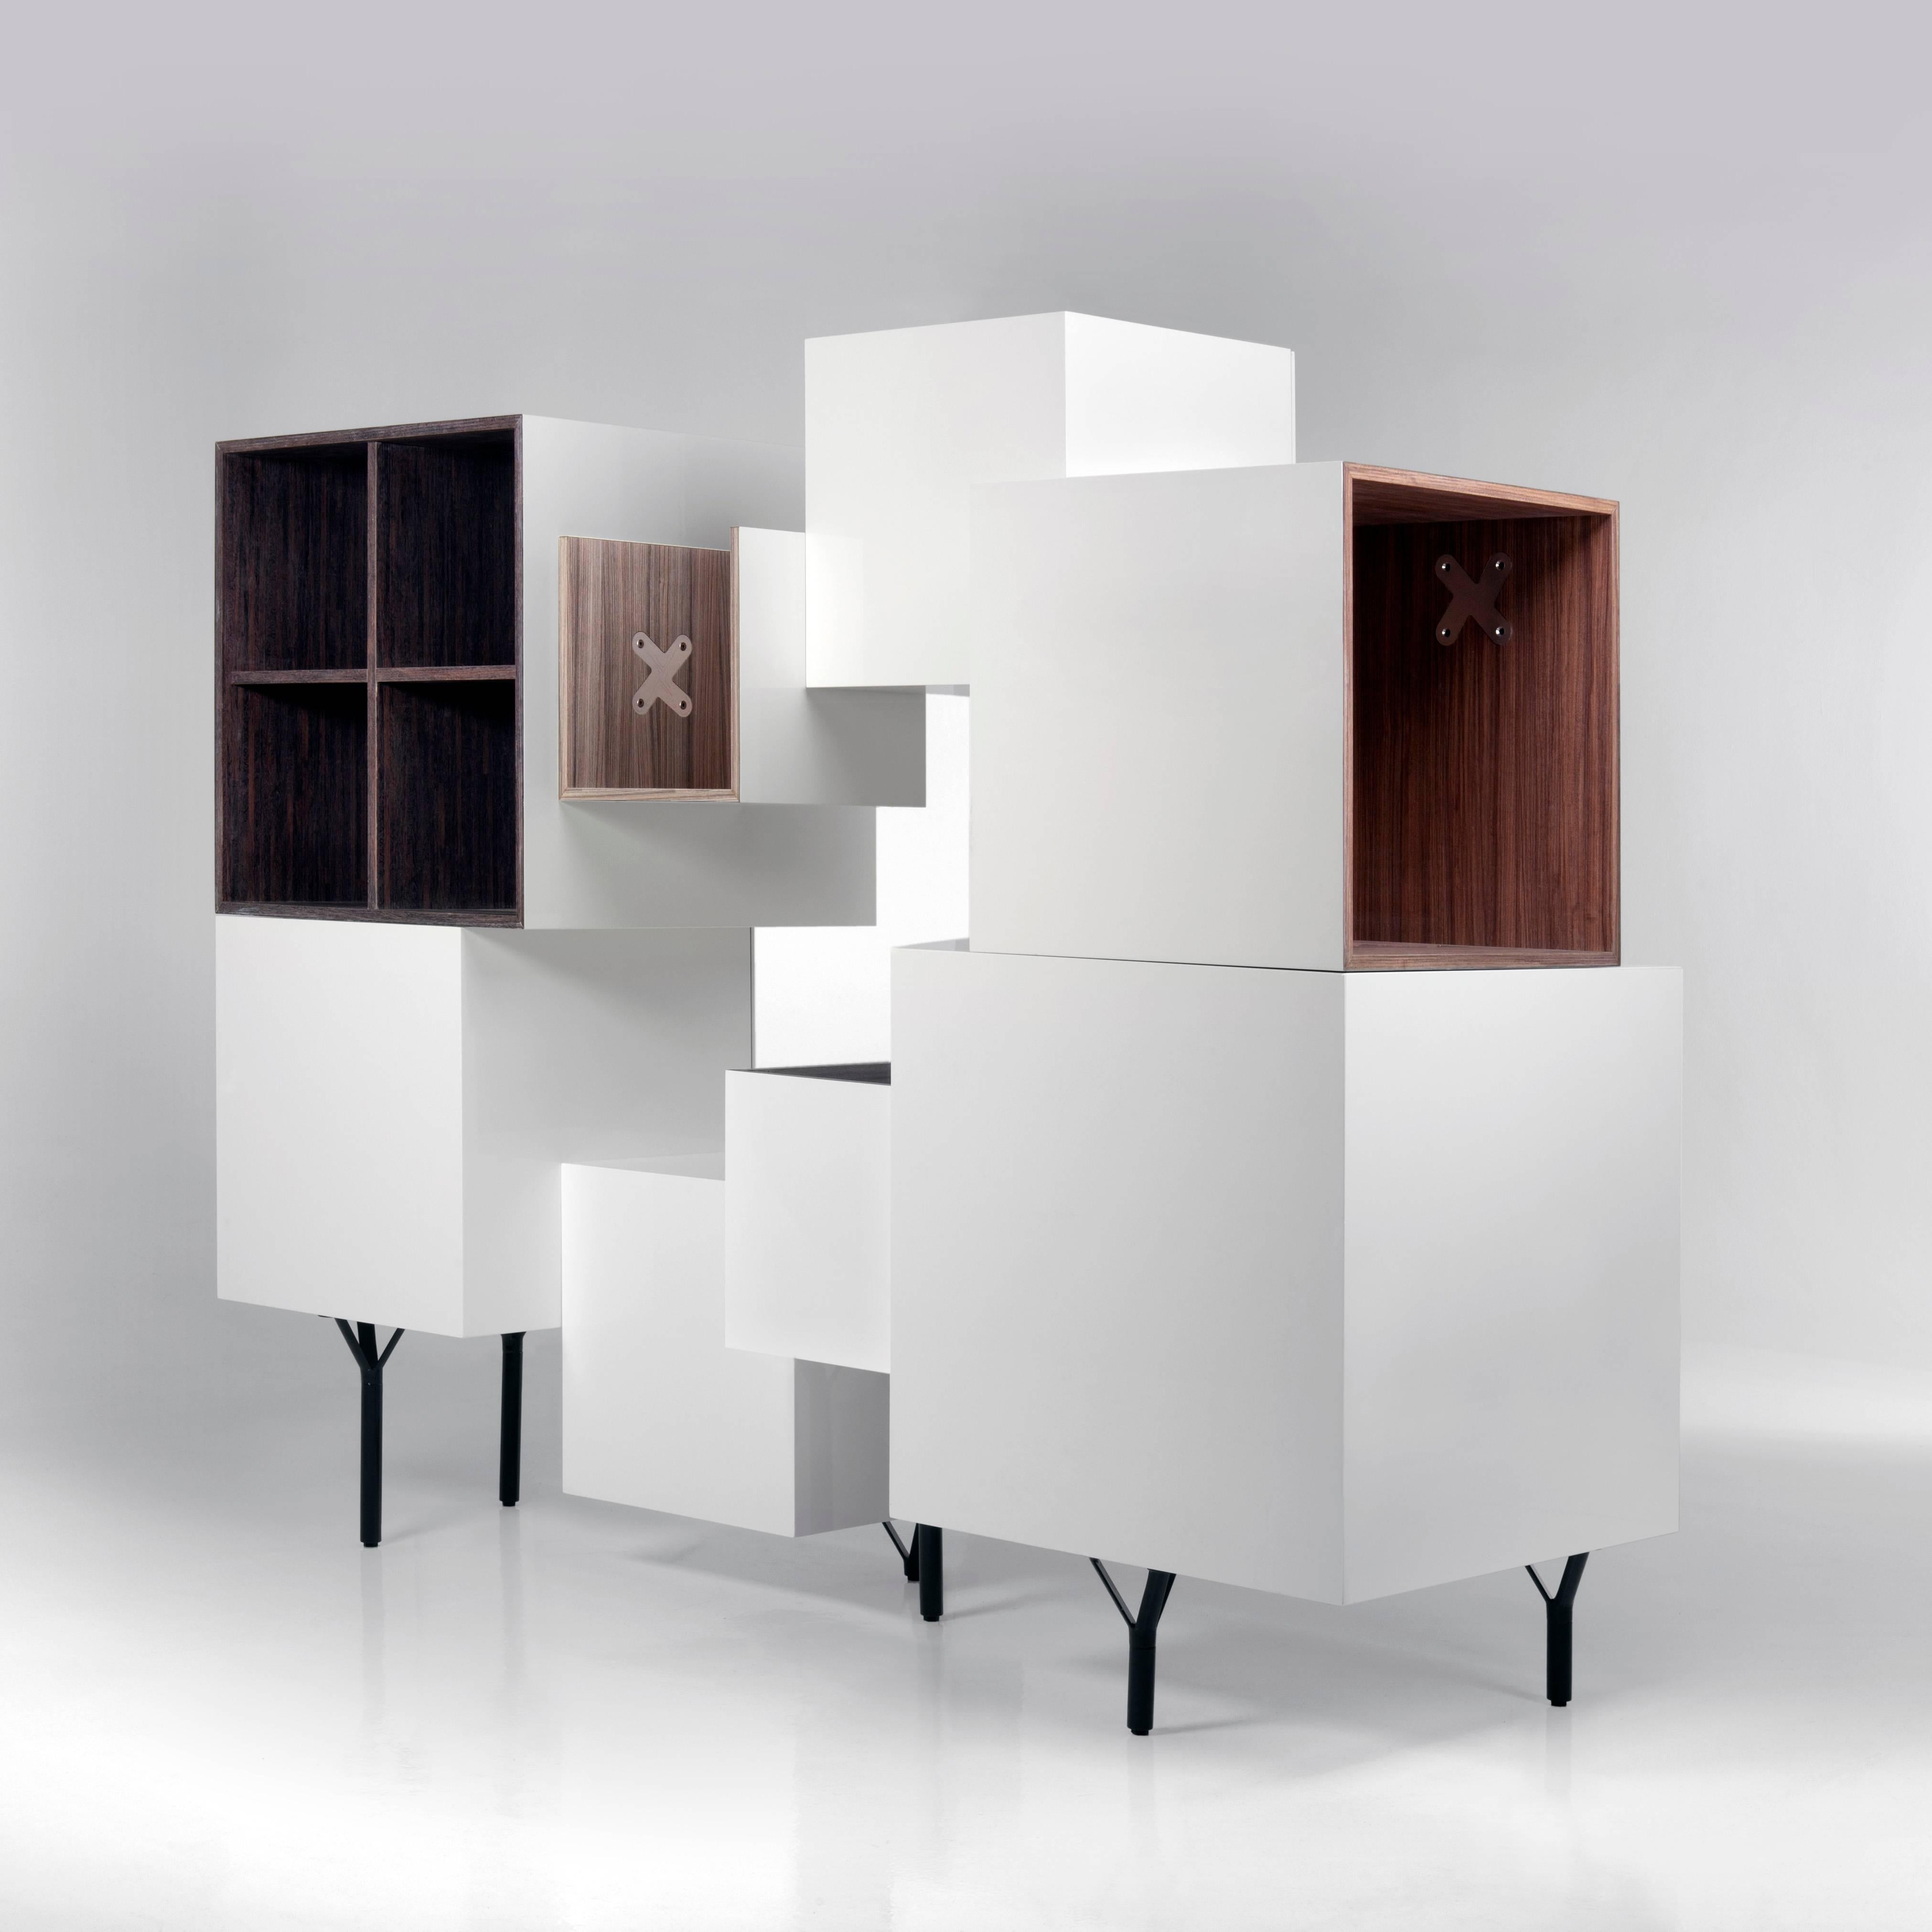 Cabinet designed by Martí Guixé in 2011 and manufactured by BD Barcelona.

This modular furniture is made of container cubes with various functions.They are dynamic both in their volume and in their positioning and finish.The woods, all different